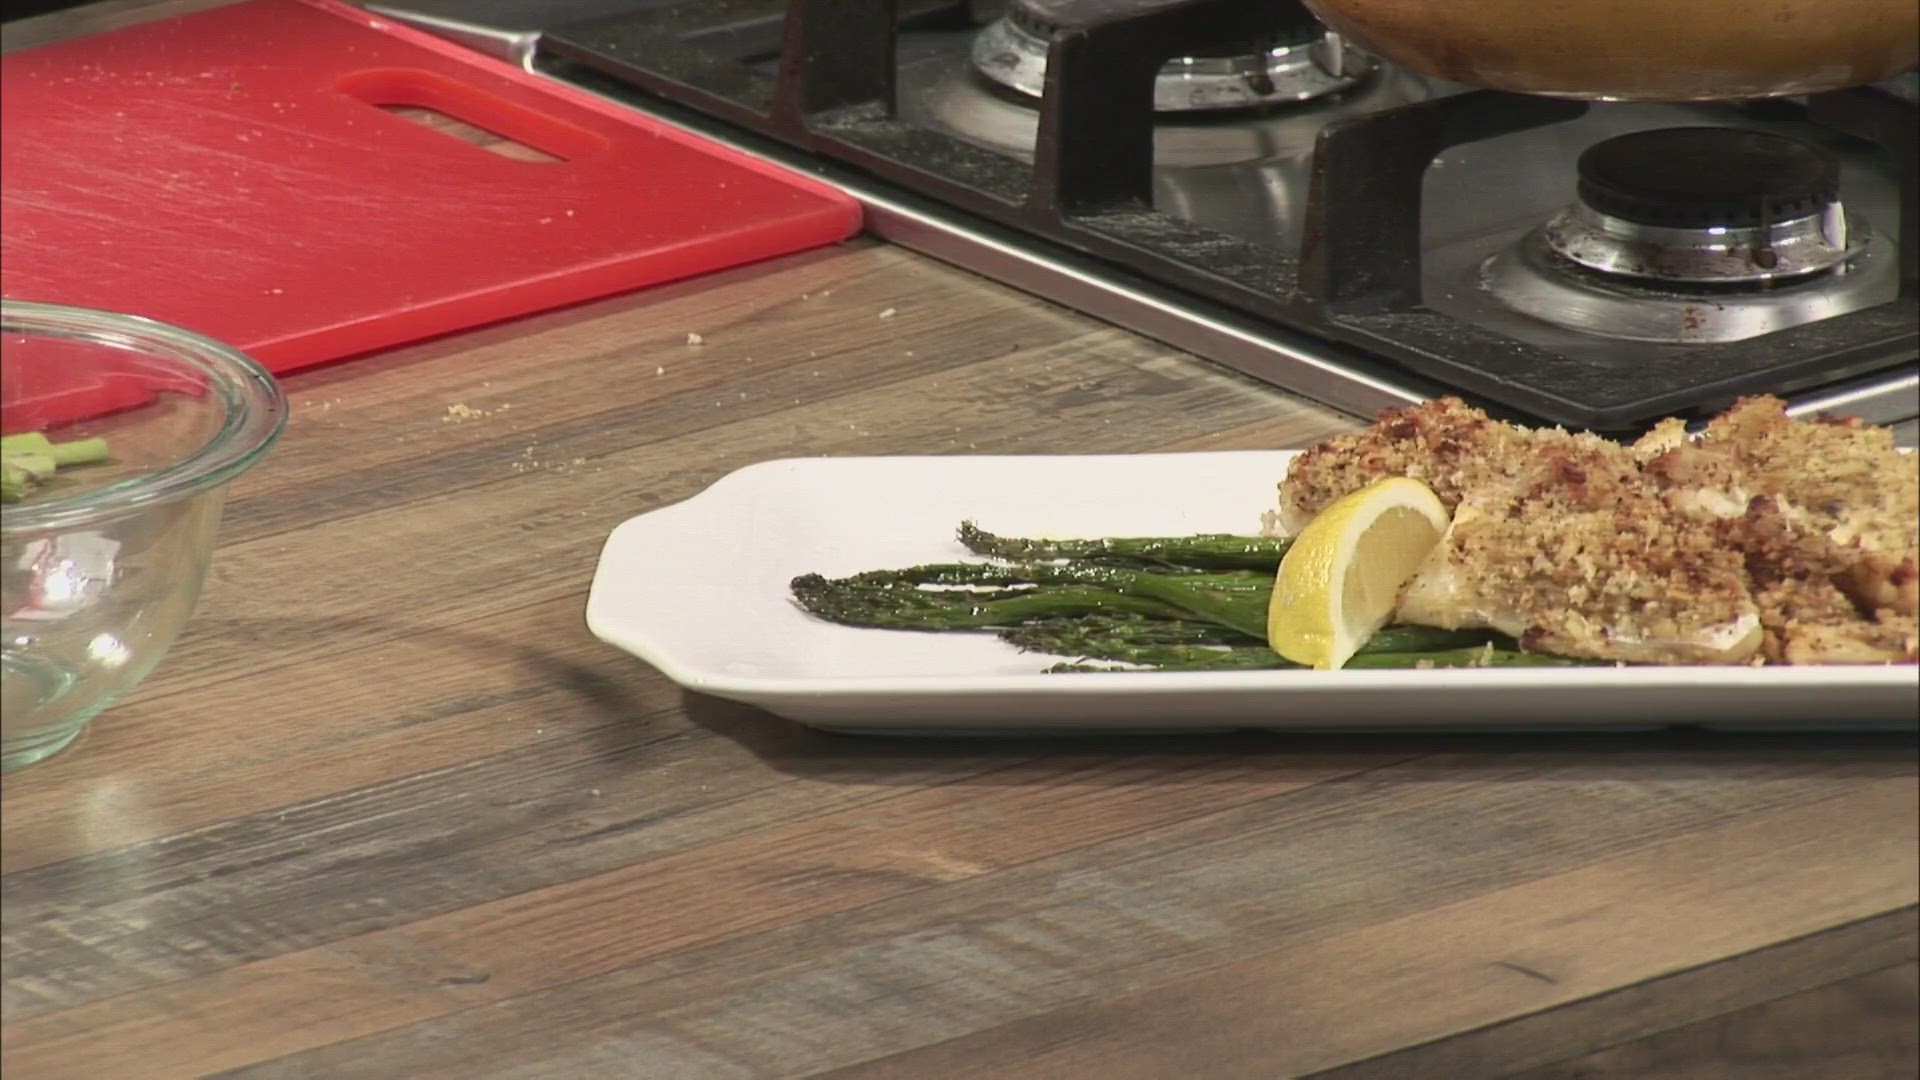 The Archer's On The Pier chef joined 207 in the studio to share her recipe for oven-baked haddock that comes together in about a half-hour.